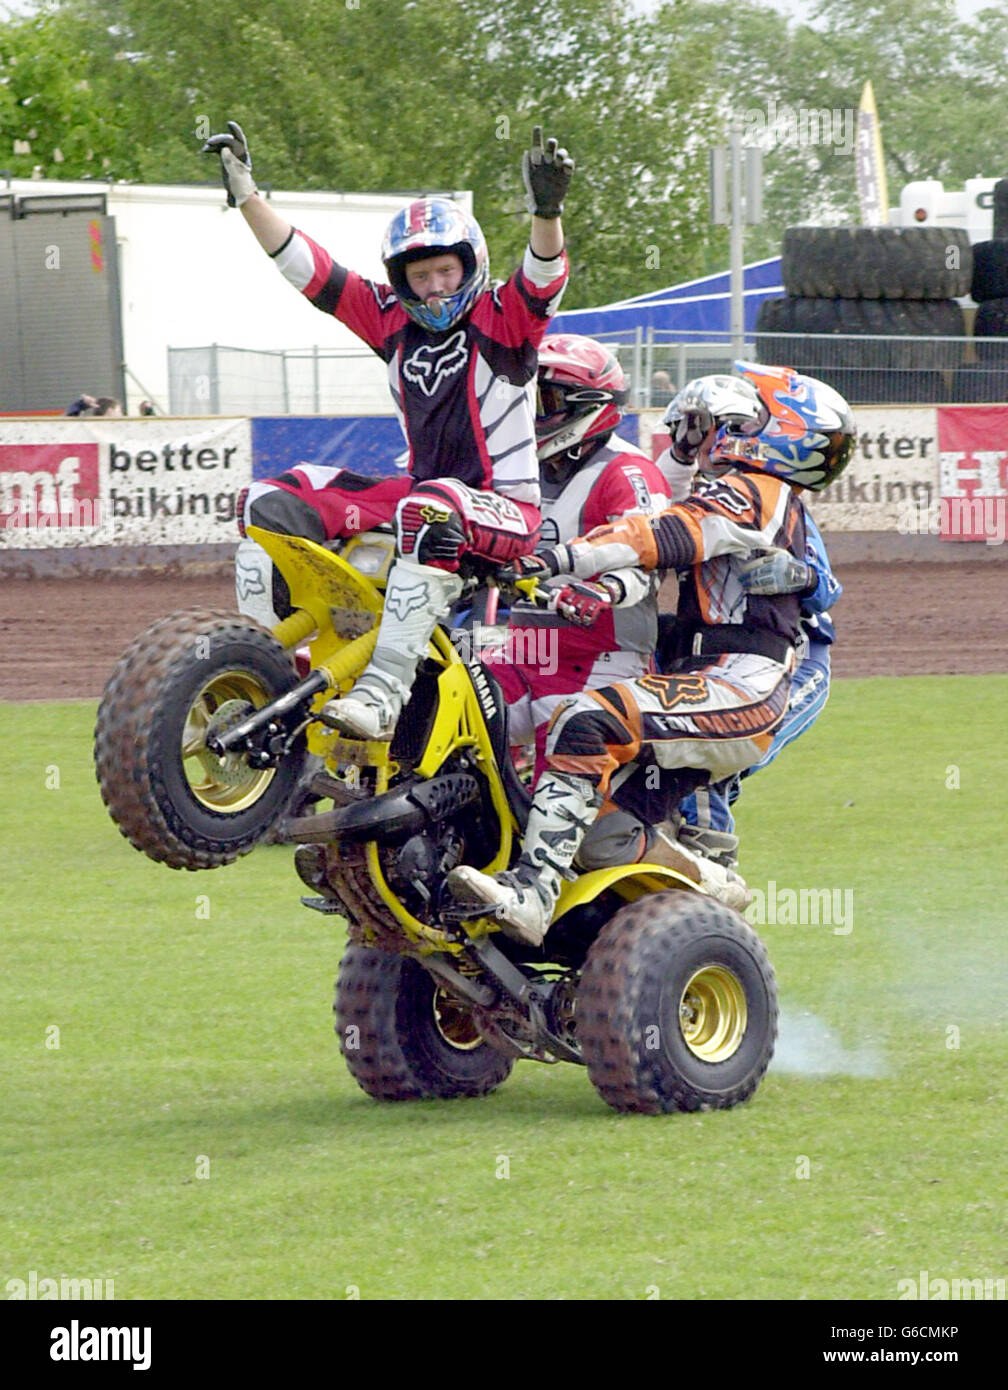 Members of the 'over the top' stunt team during their performance at the British Motorcycle Federation outdoor motorcycle show at the East of England showground, Peterborough. Stock Photo